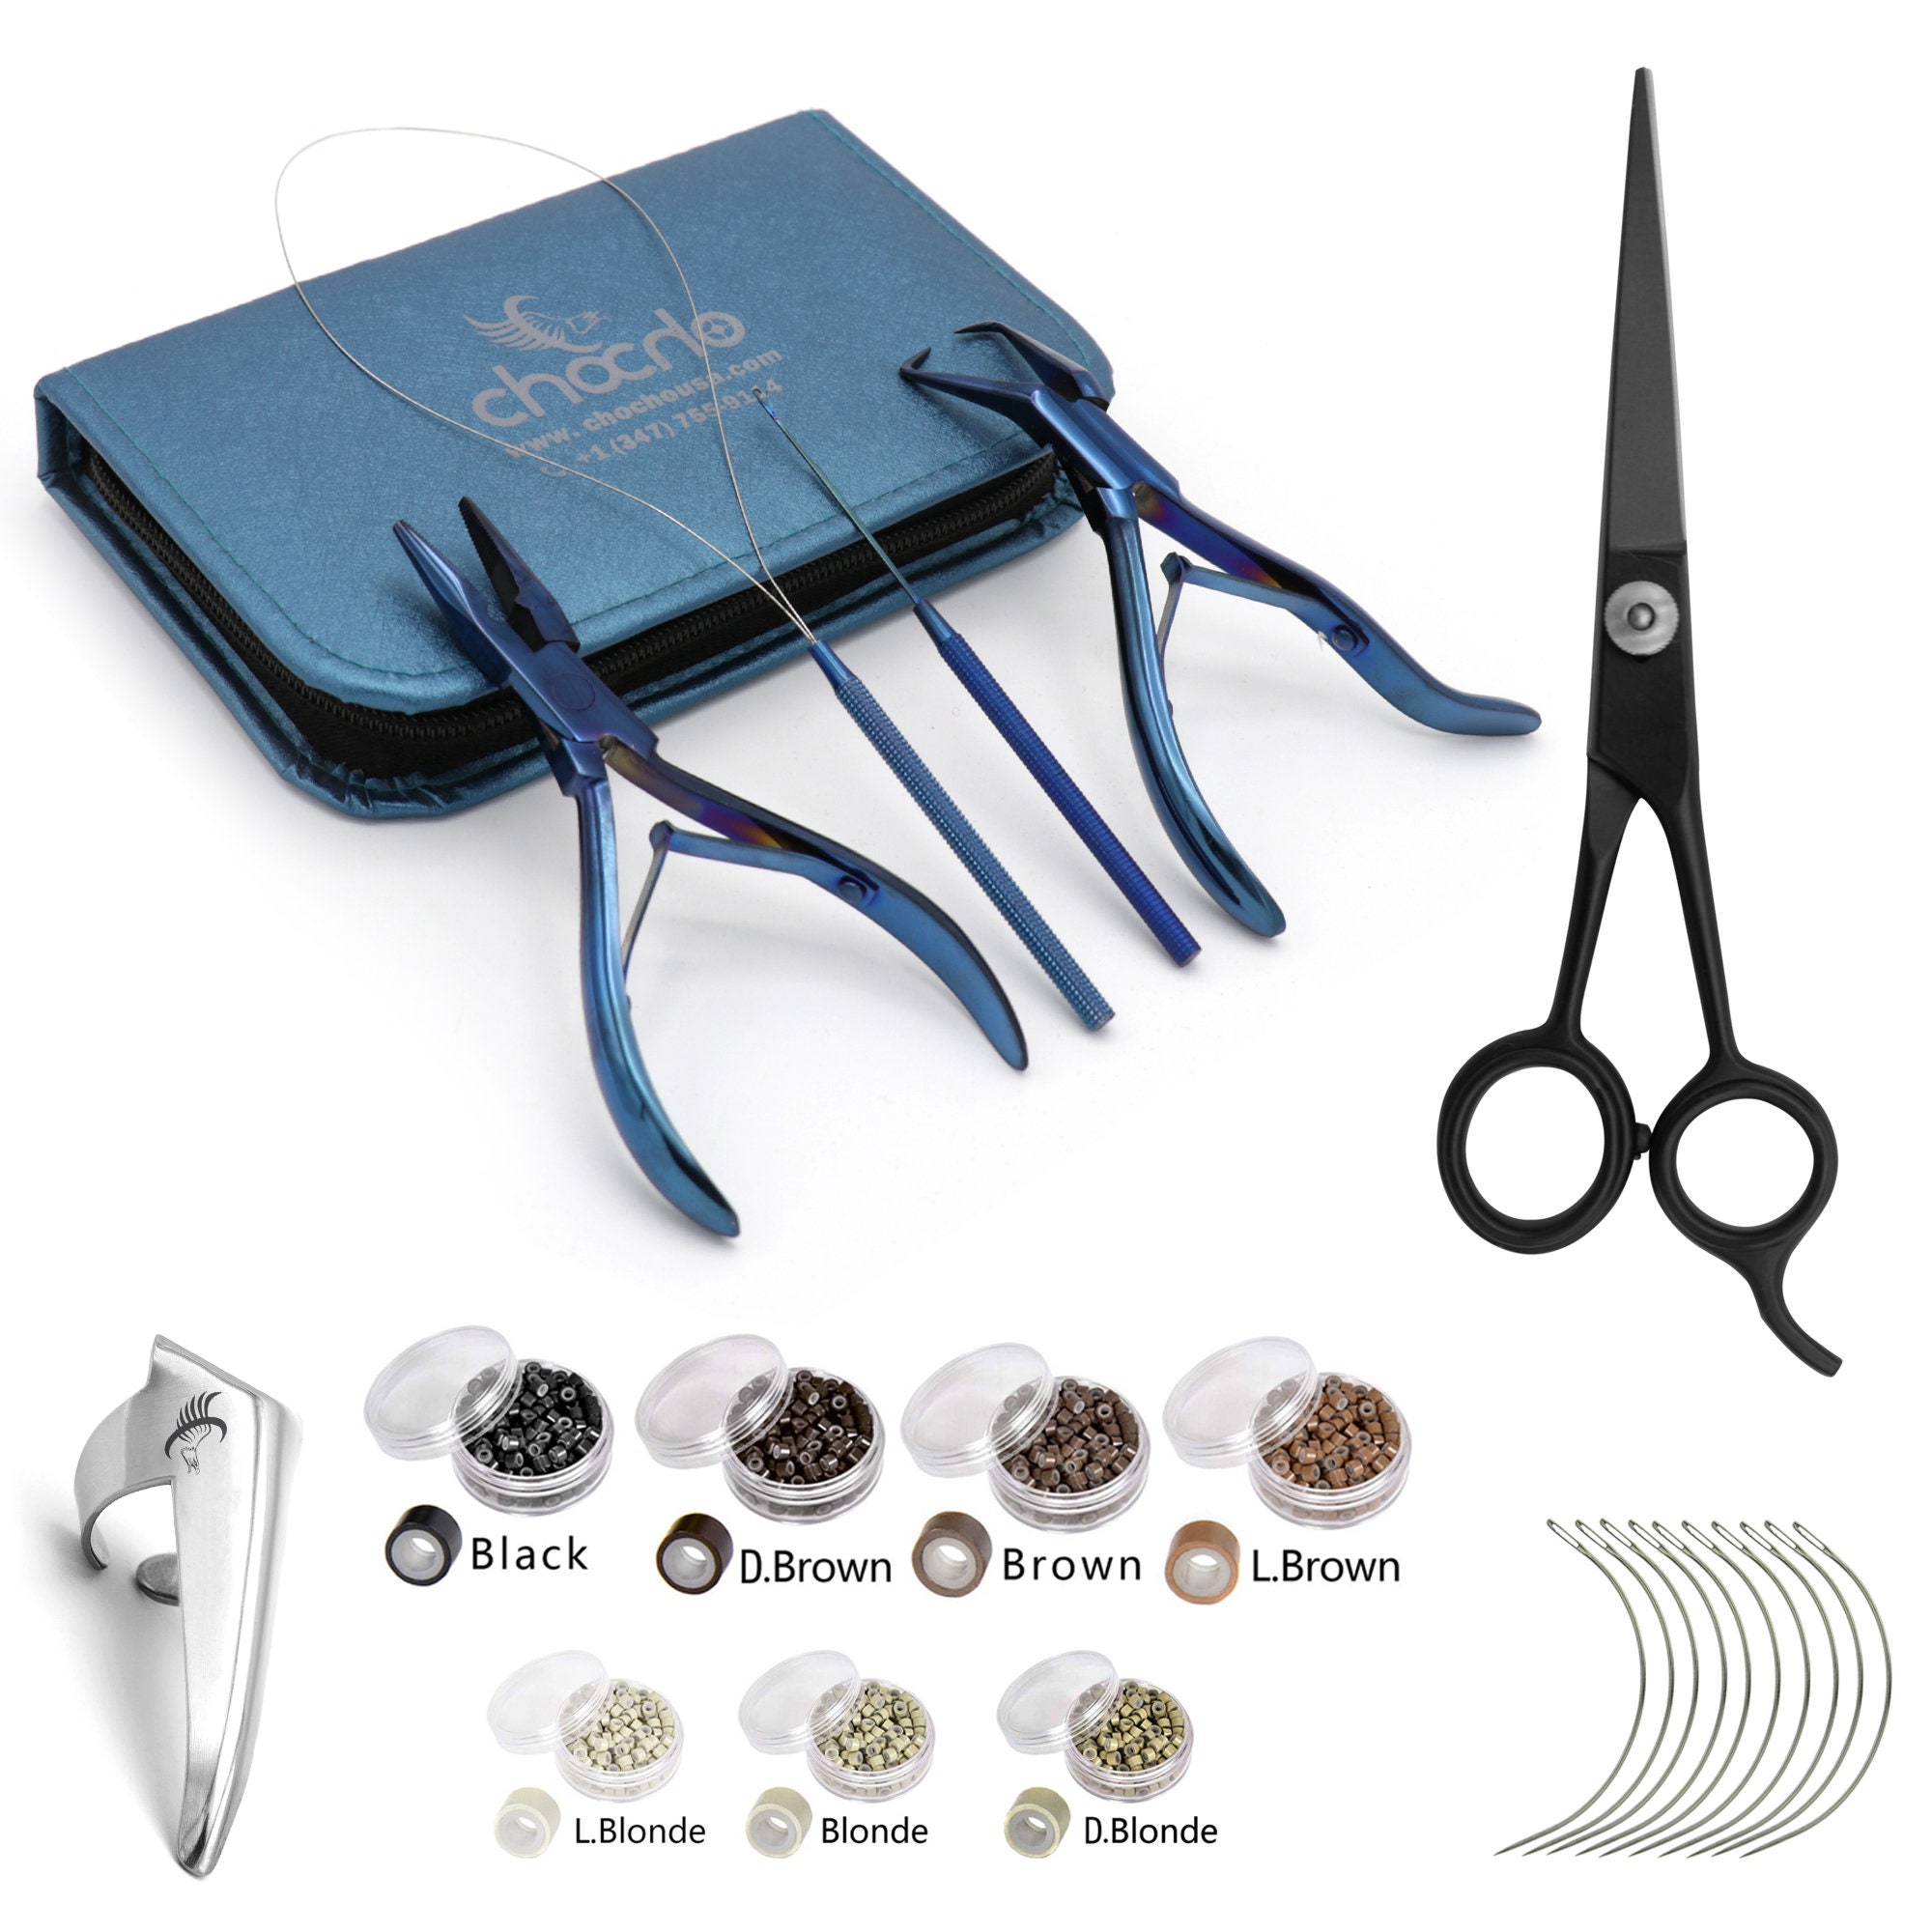 COMPLETE KITS or Pick Only the Tools You Want / Micro Link Beads